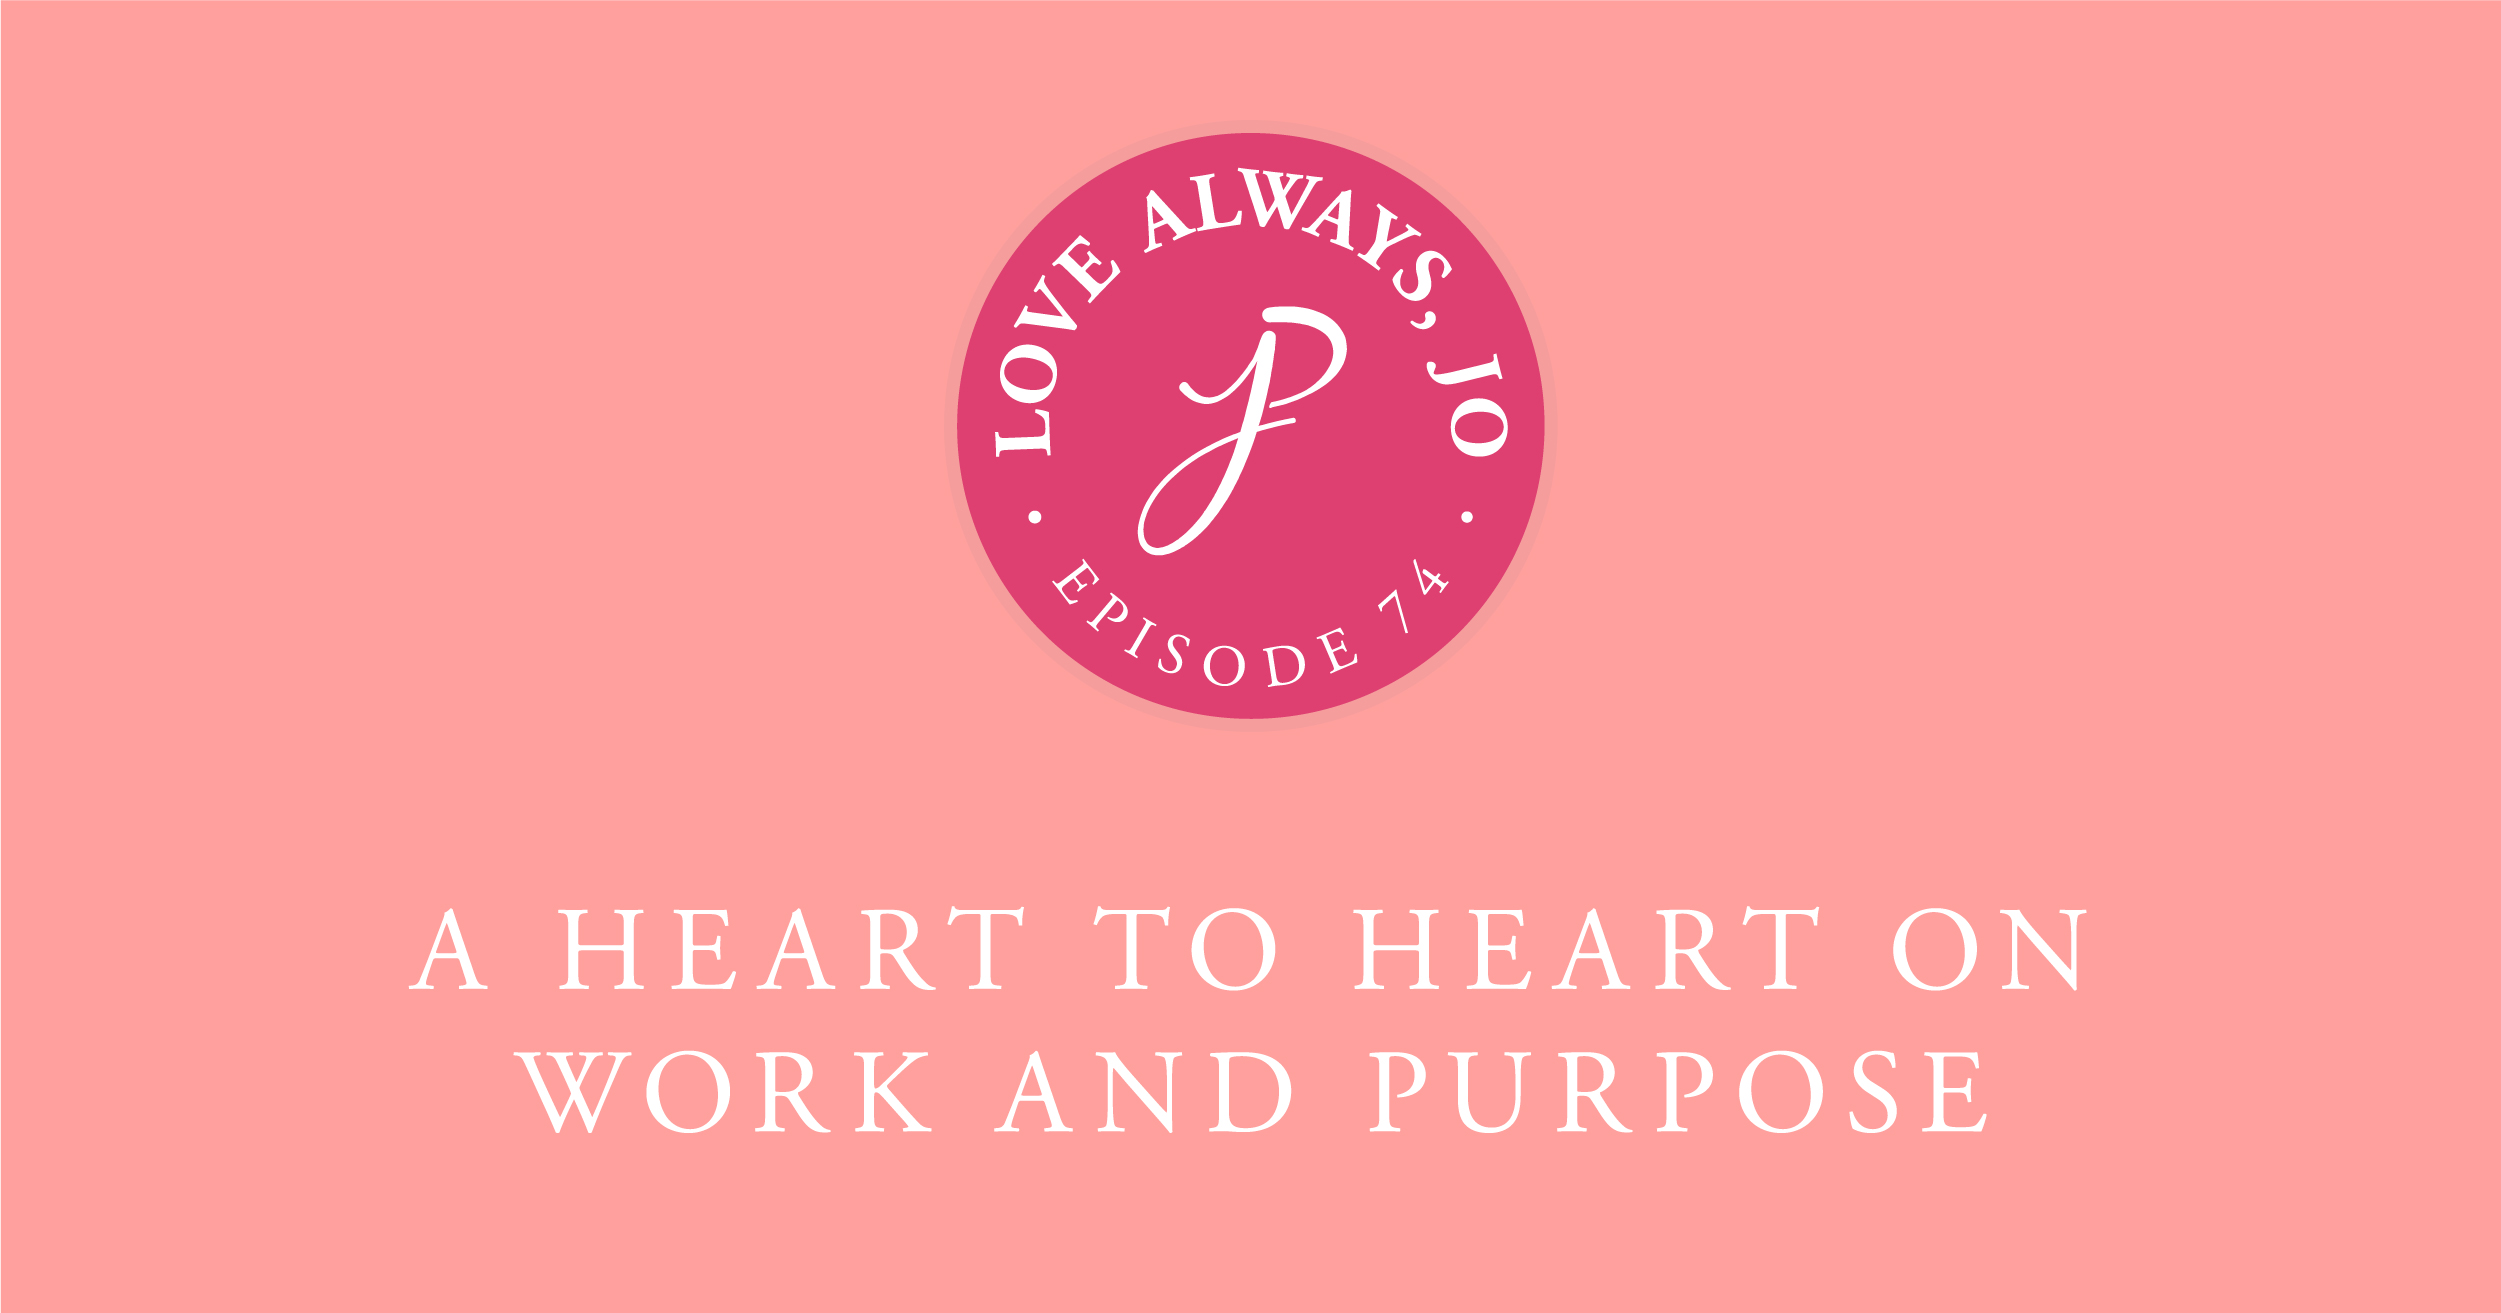 Love Always Jo Podcast Episode 74 Heart to Heart on Work and Purpose